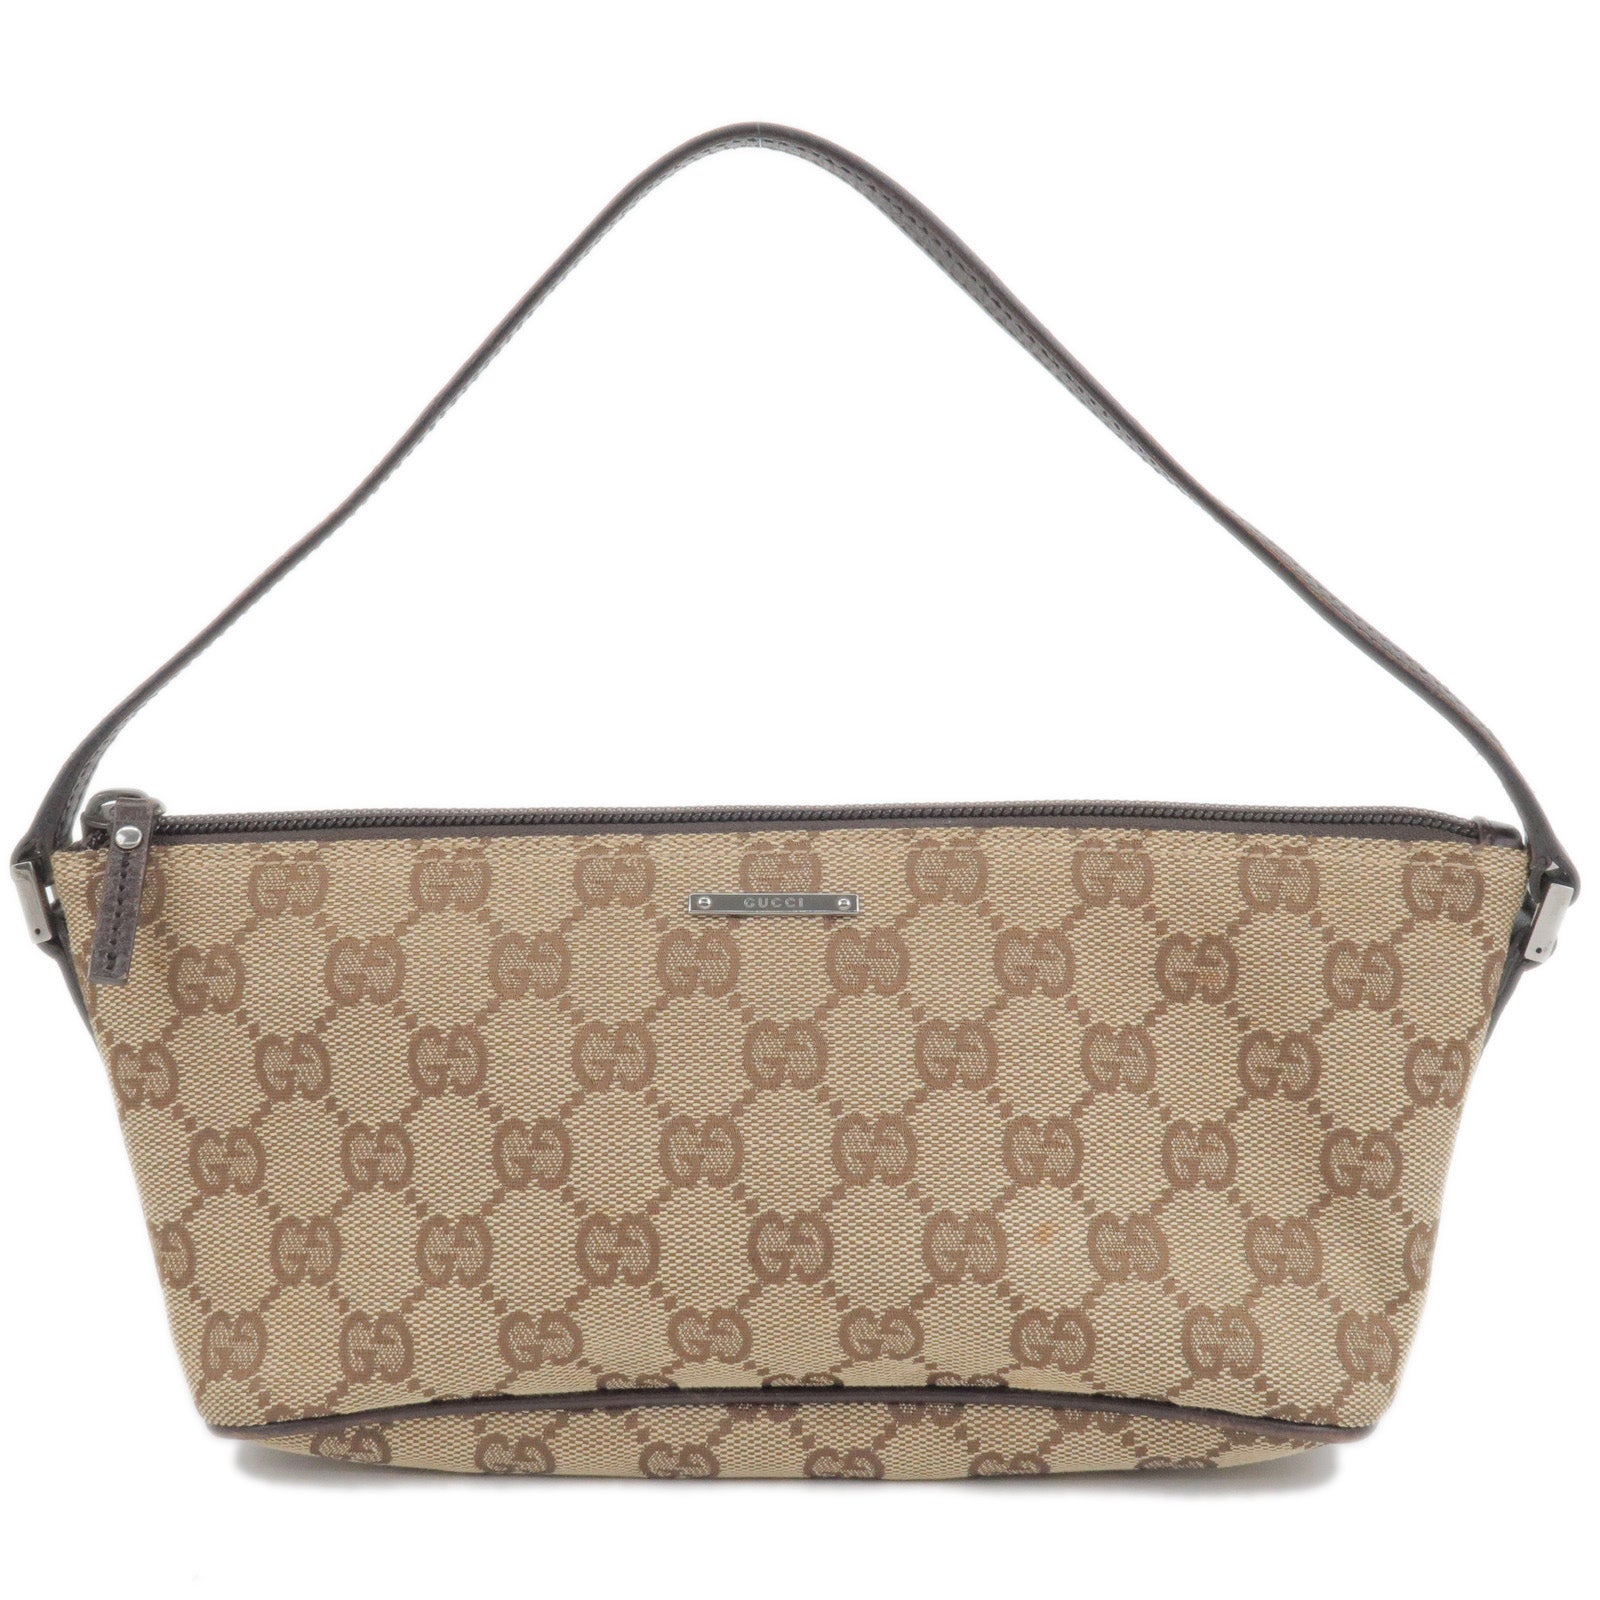 GUCCI-GG-Canvas-Leather-Boat-Bag-Hand-Bag-Beige-Brown-07198-